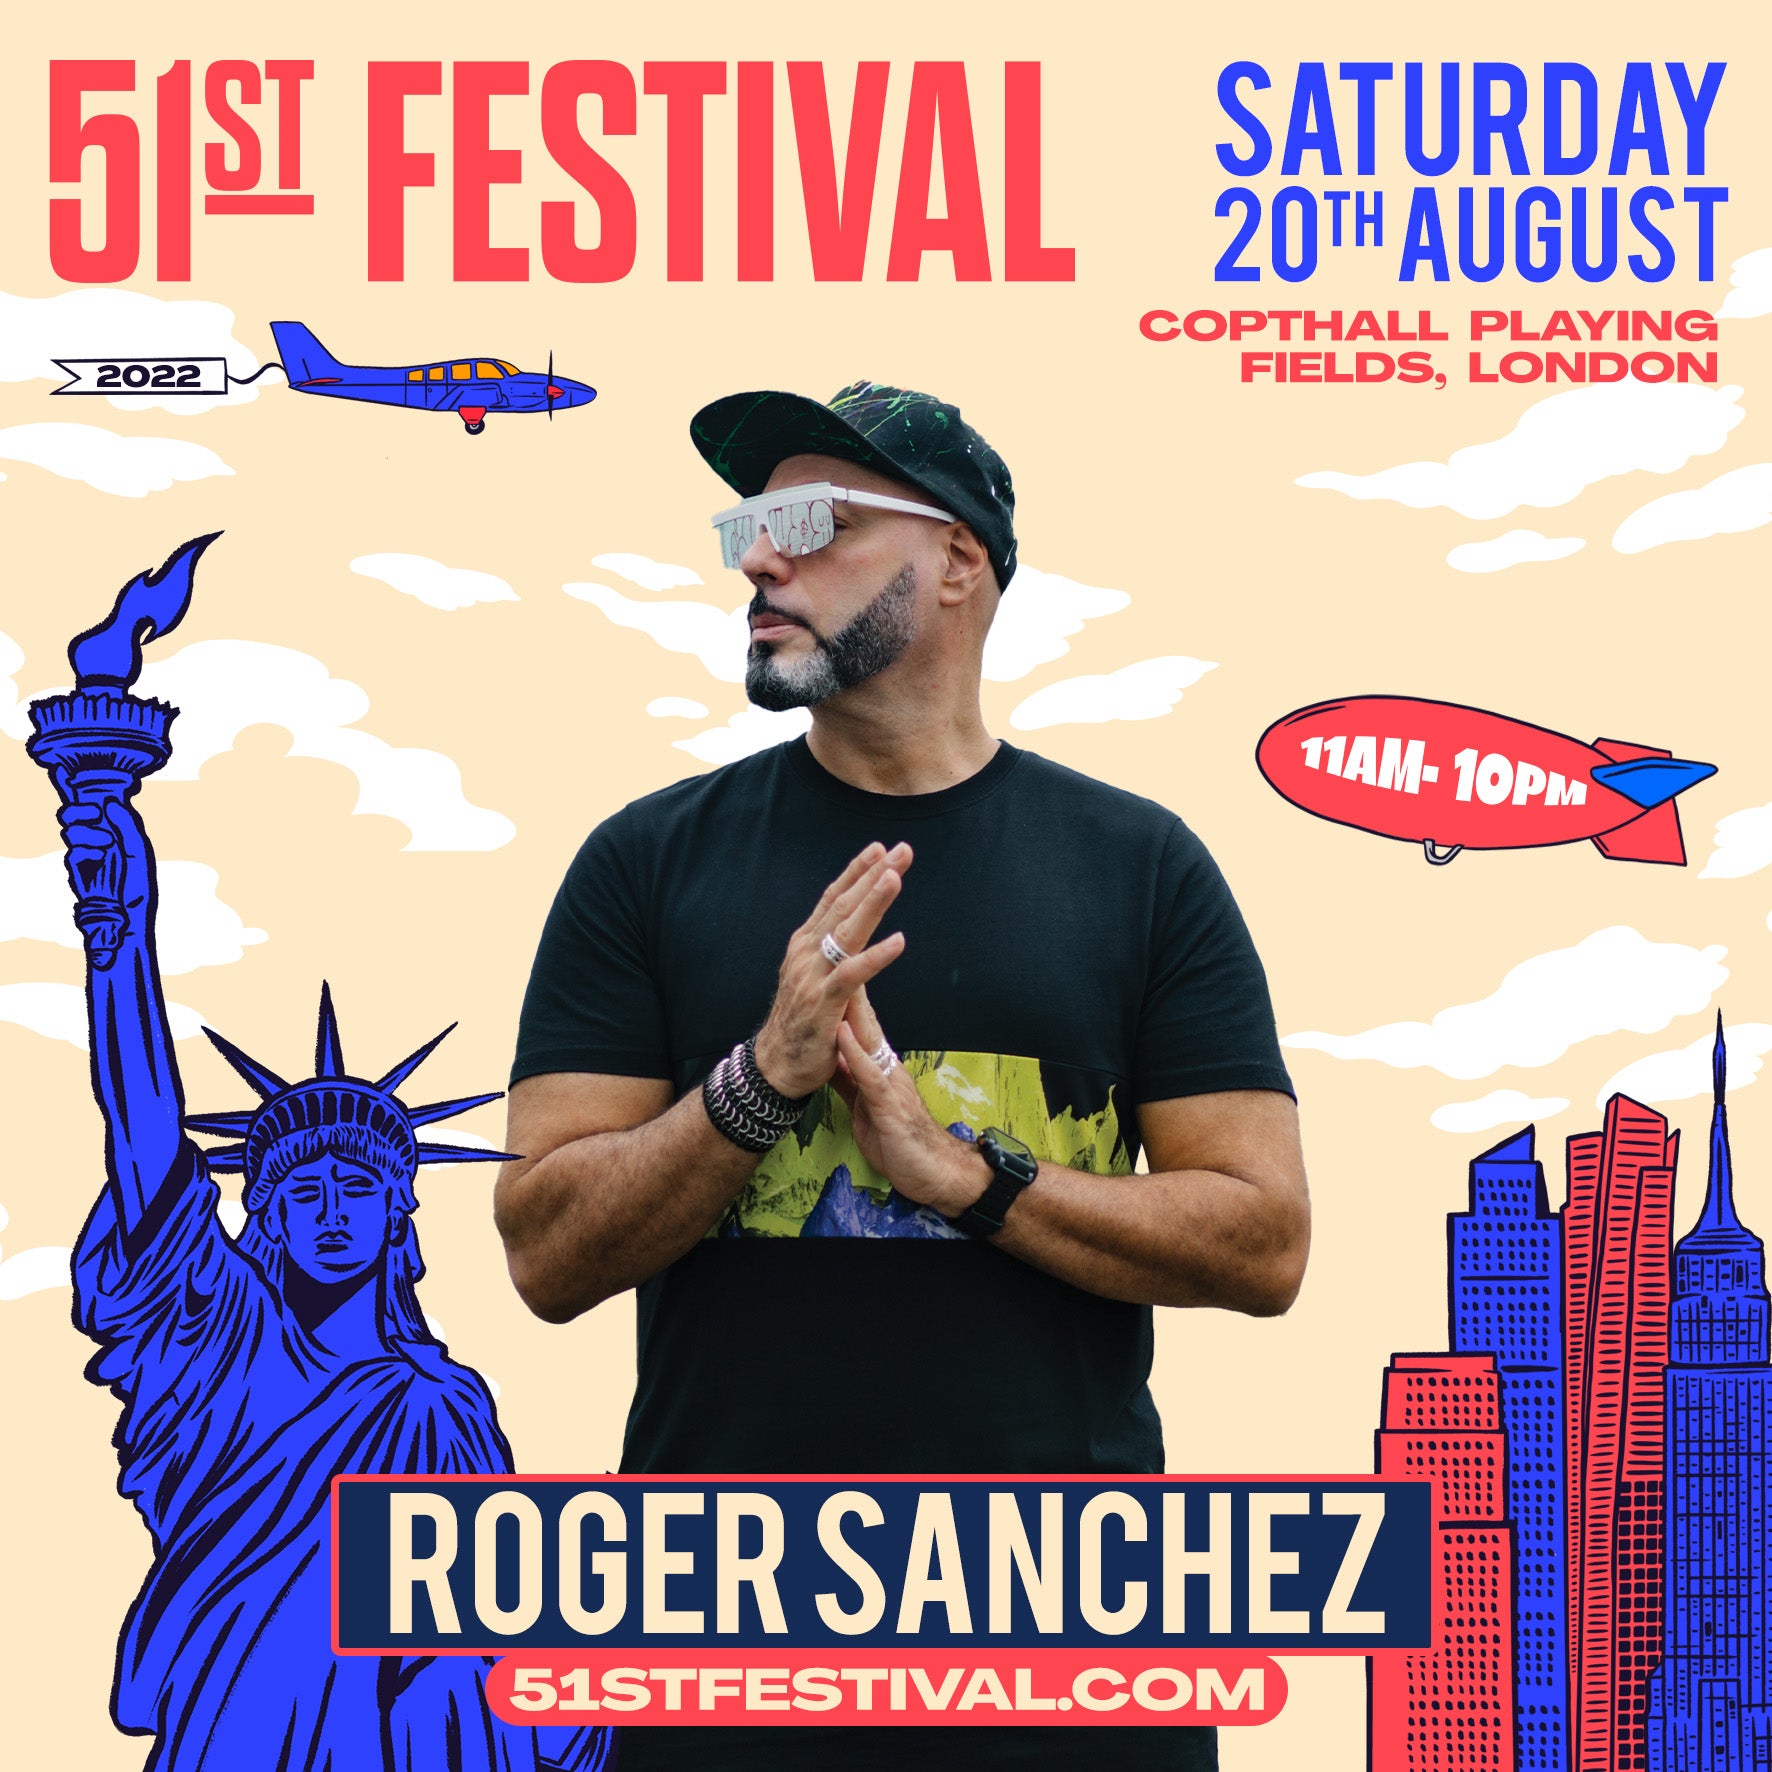 'RELEASE YOURSELF' TO ROGER SANCHEZ AT 51ST FESTIVAL!